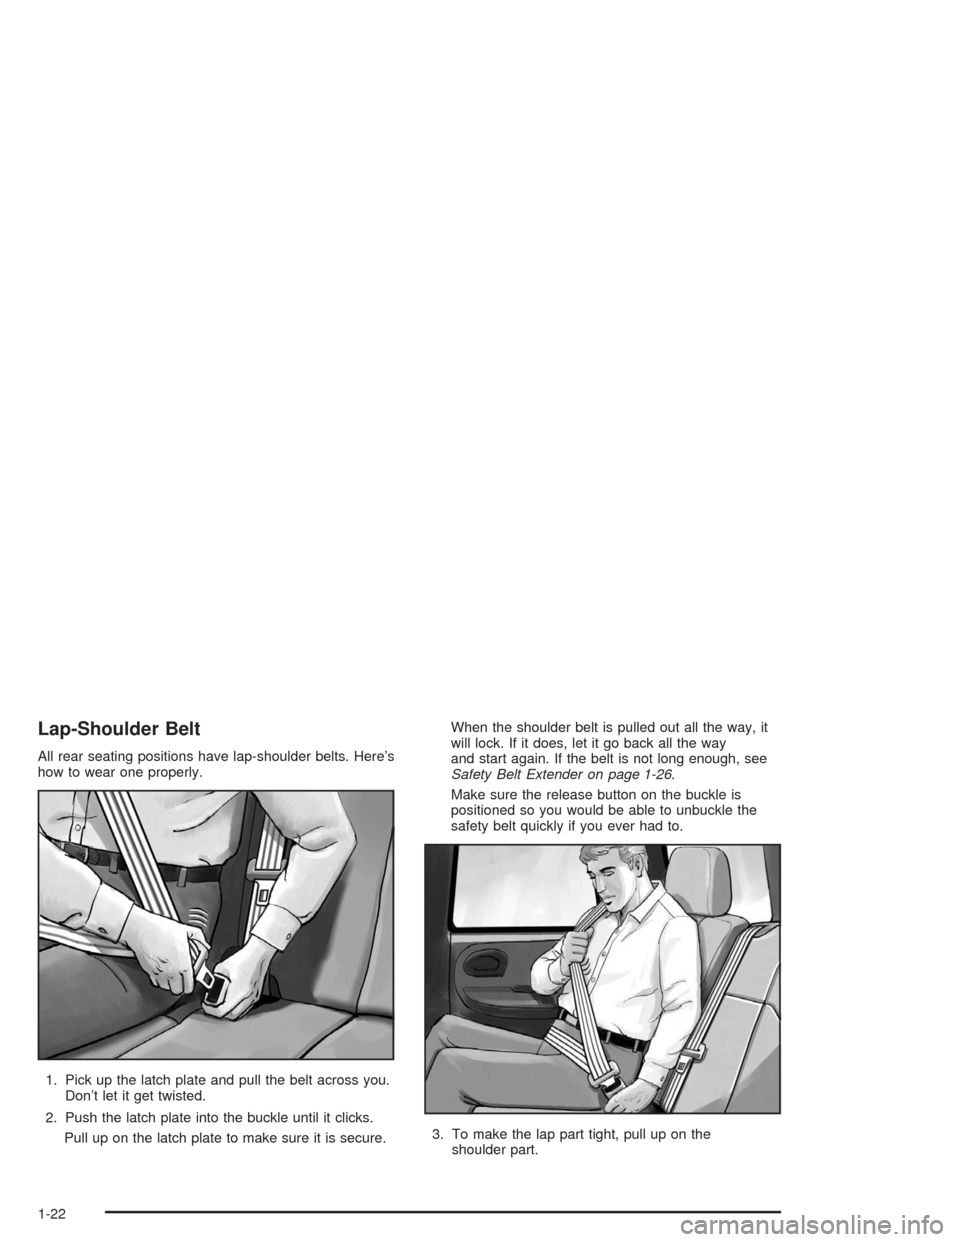 Oldsmobile Bravada 2004  s Owners Guide Lap-Shoulder Belt
All rear seating positions have lap-shoulder belts. Here’s
how to wear one properly.
1. Pick up the latch plate and pull the belt across you.
Don’t let it get twisted.
2. Push th